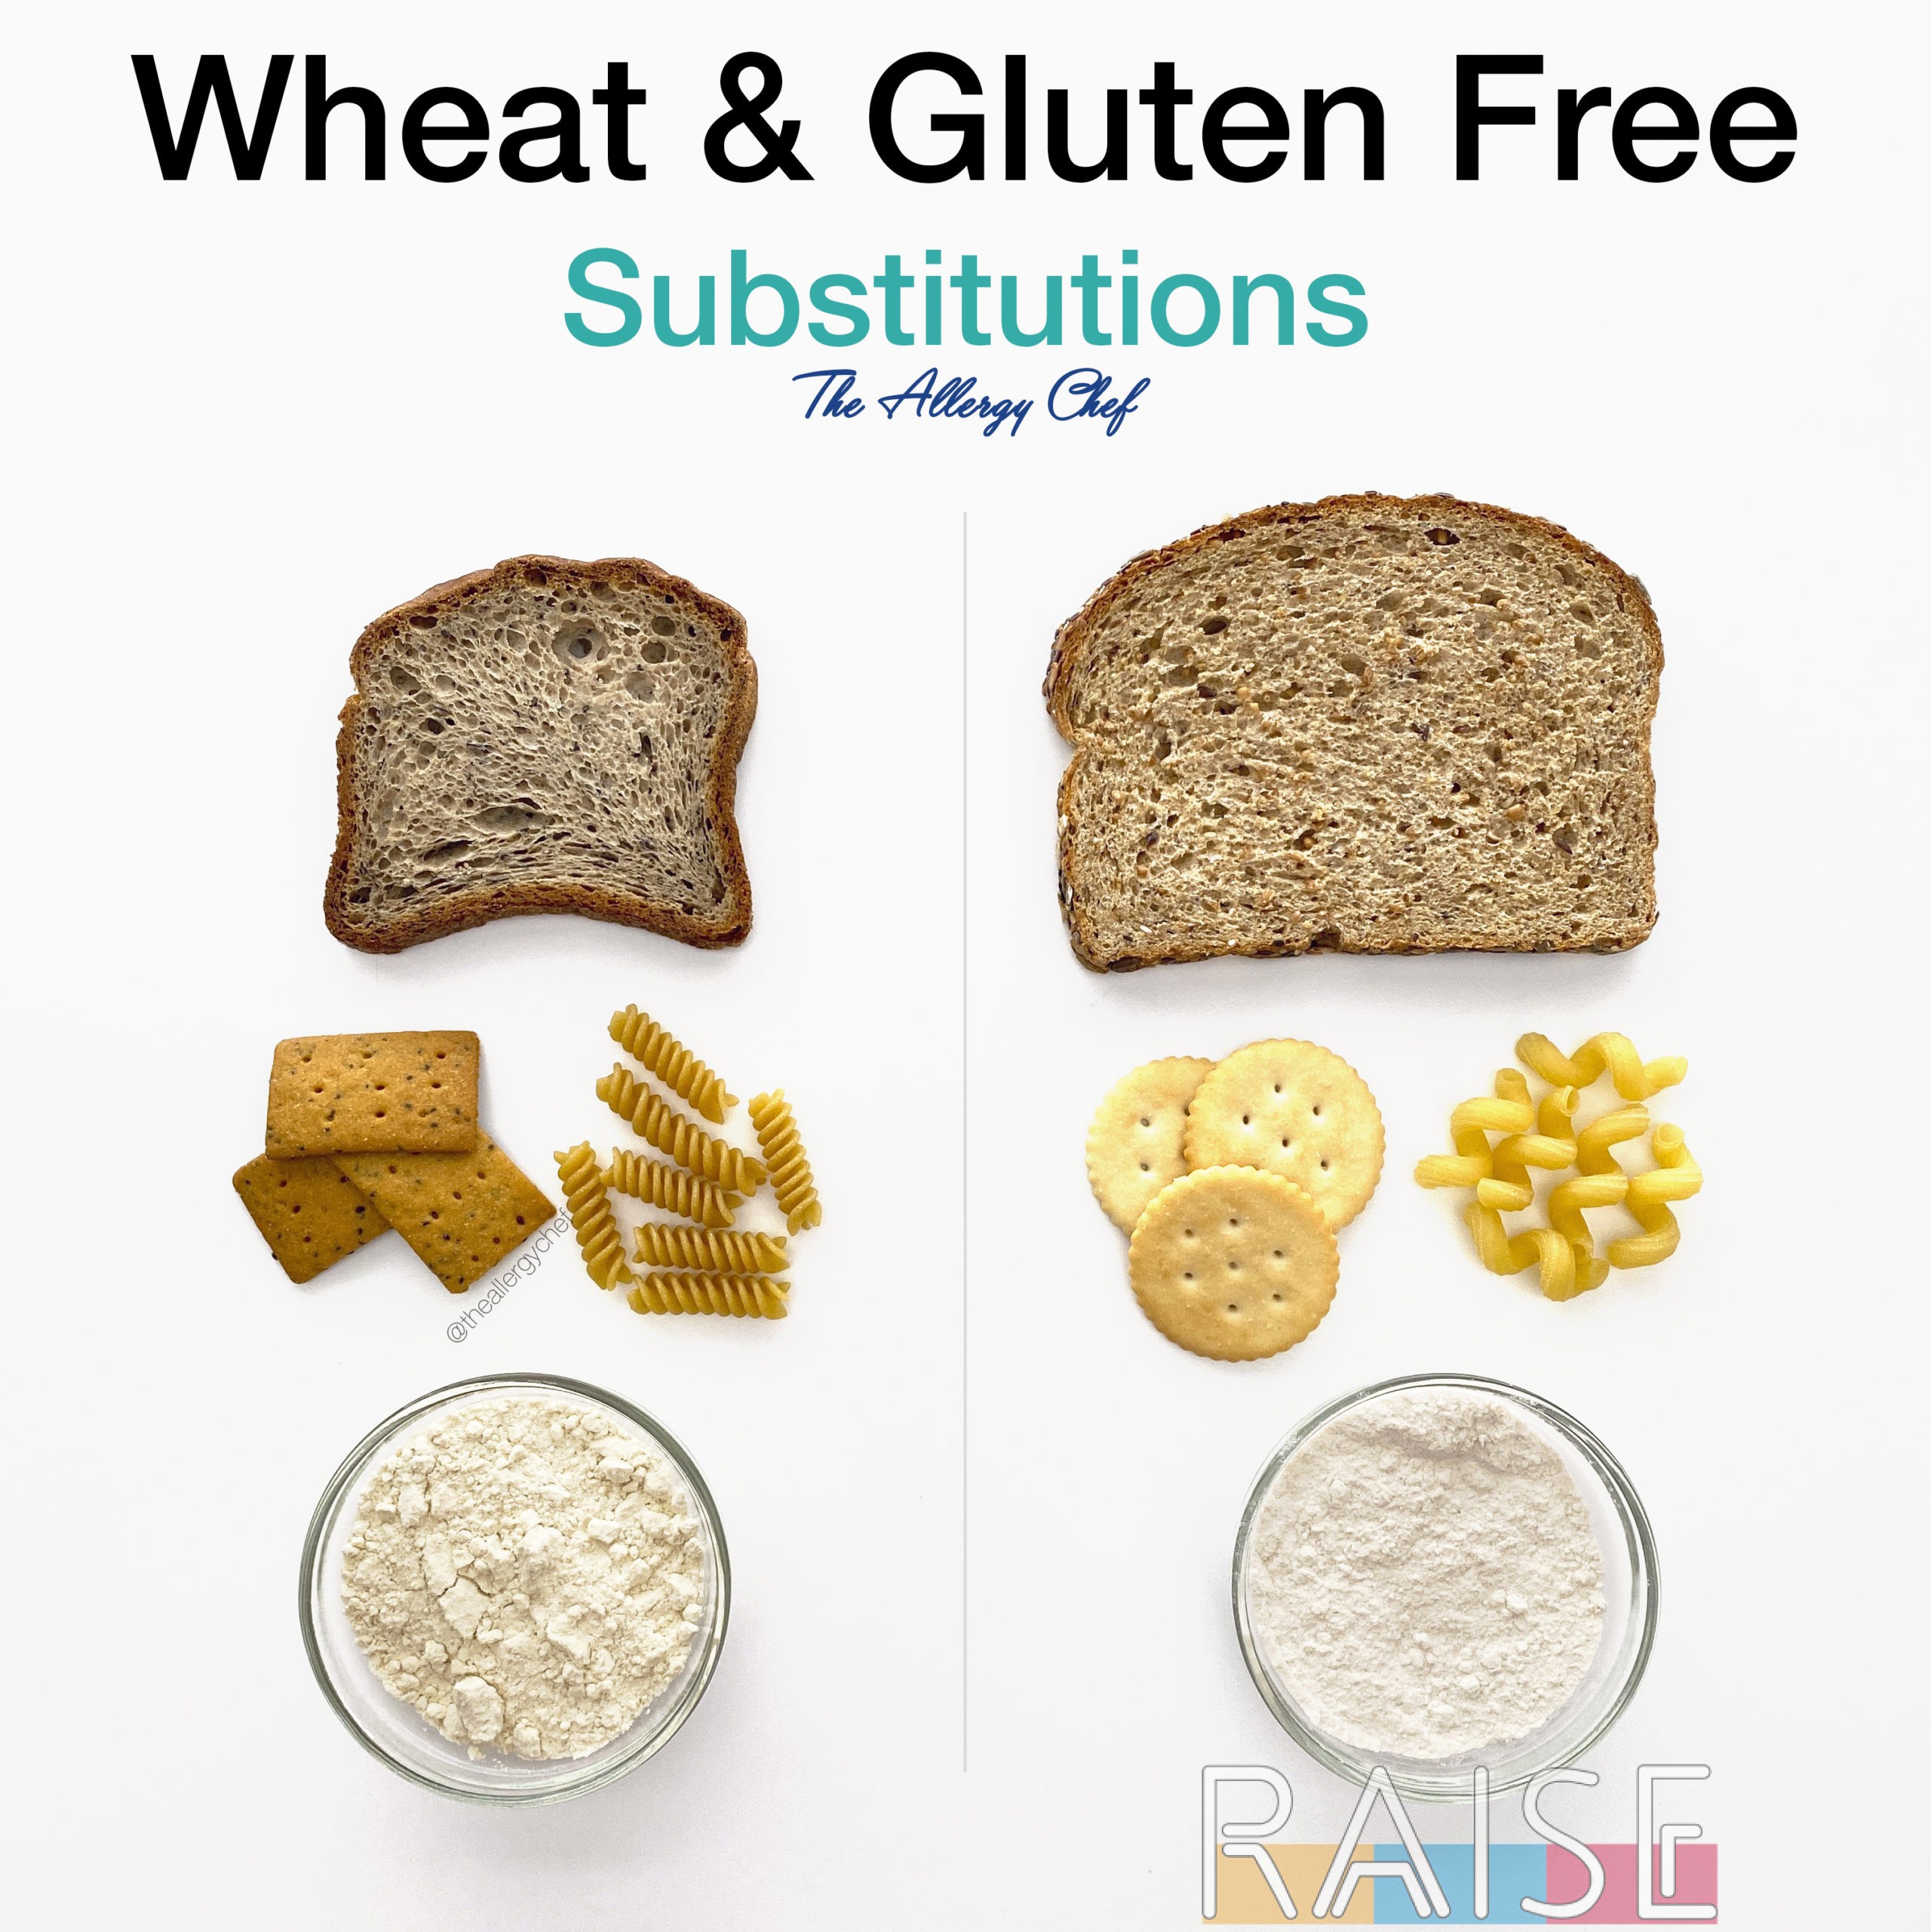 Affordable wheat-free alternatives